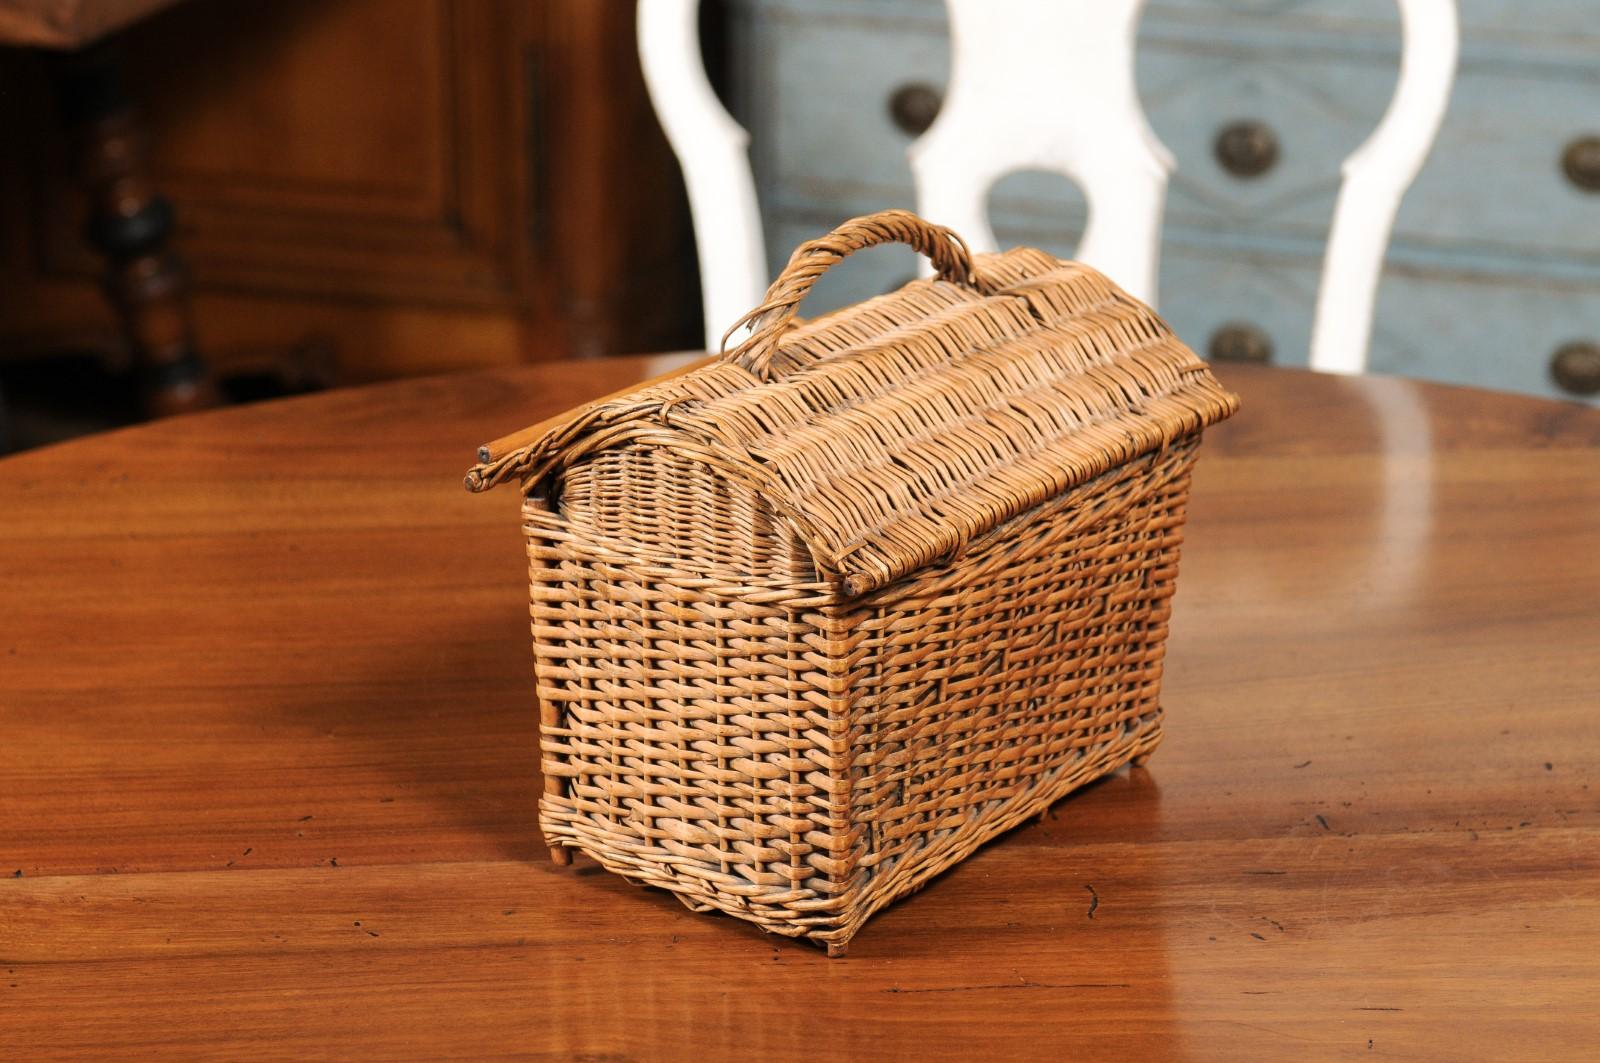 A rustic English wicker basket from the 20th century, with arching lift top and small handle. Created in England during the 20th century, this wicker basket features an arching roof-inspired lid opening thanks to a handle and a rod to reveal a small